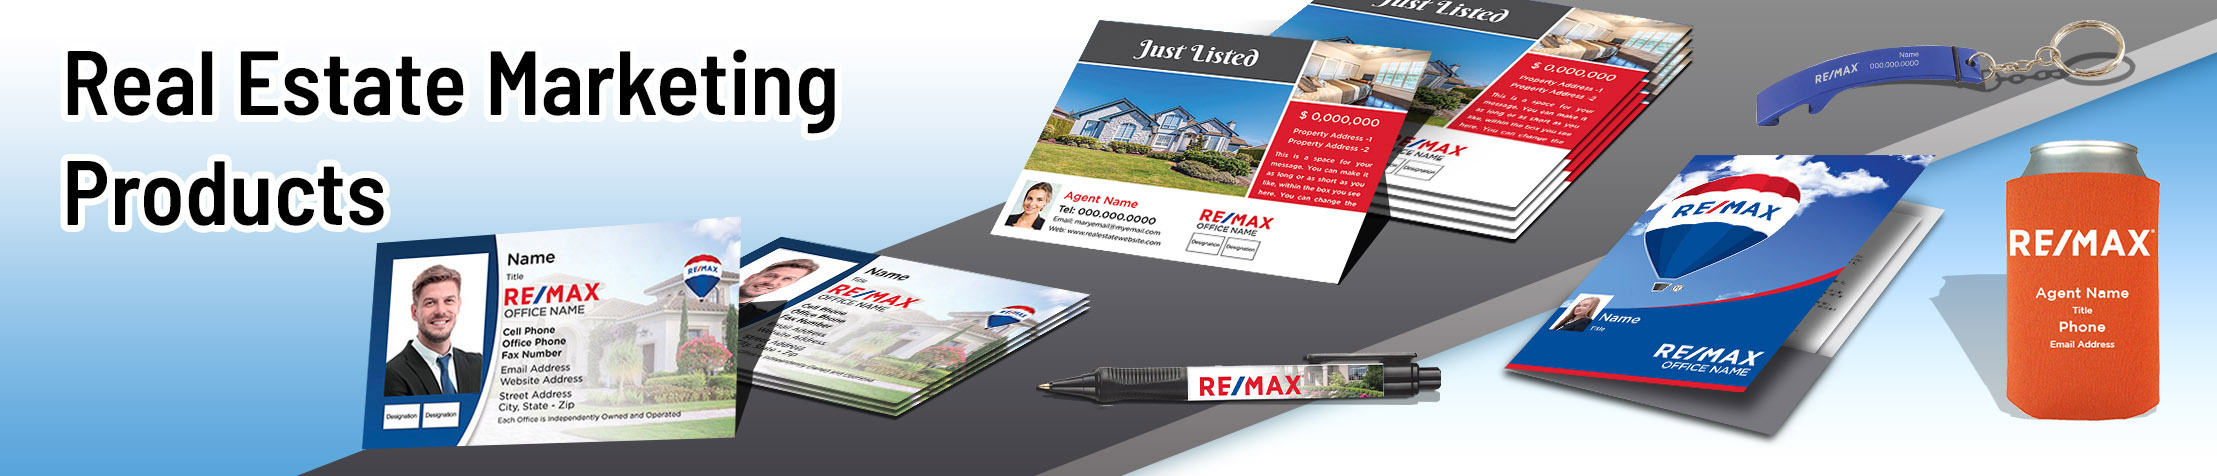 RE/MAX  Marketing Products | Sparkprint.com